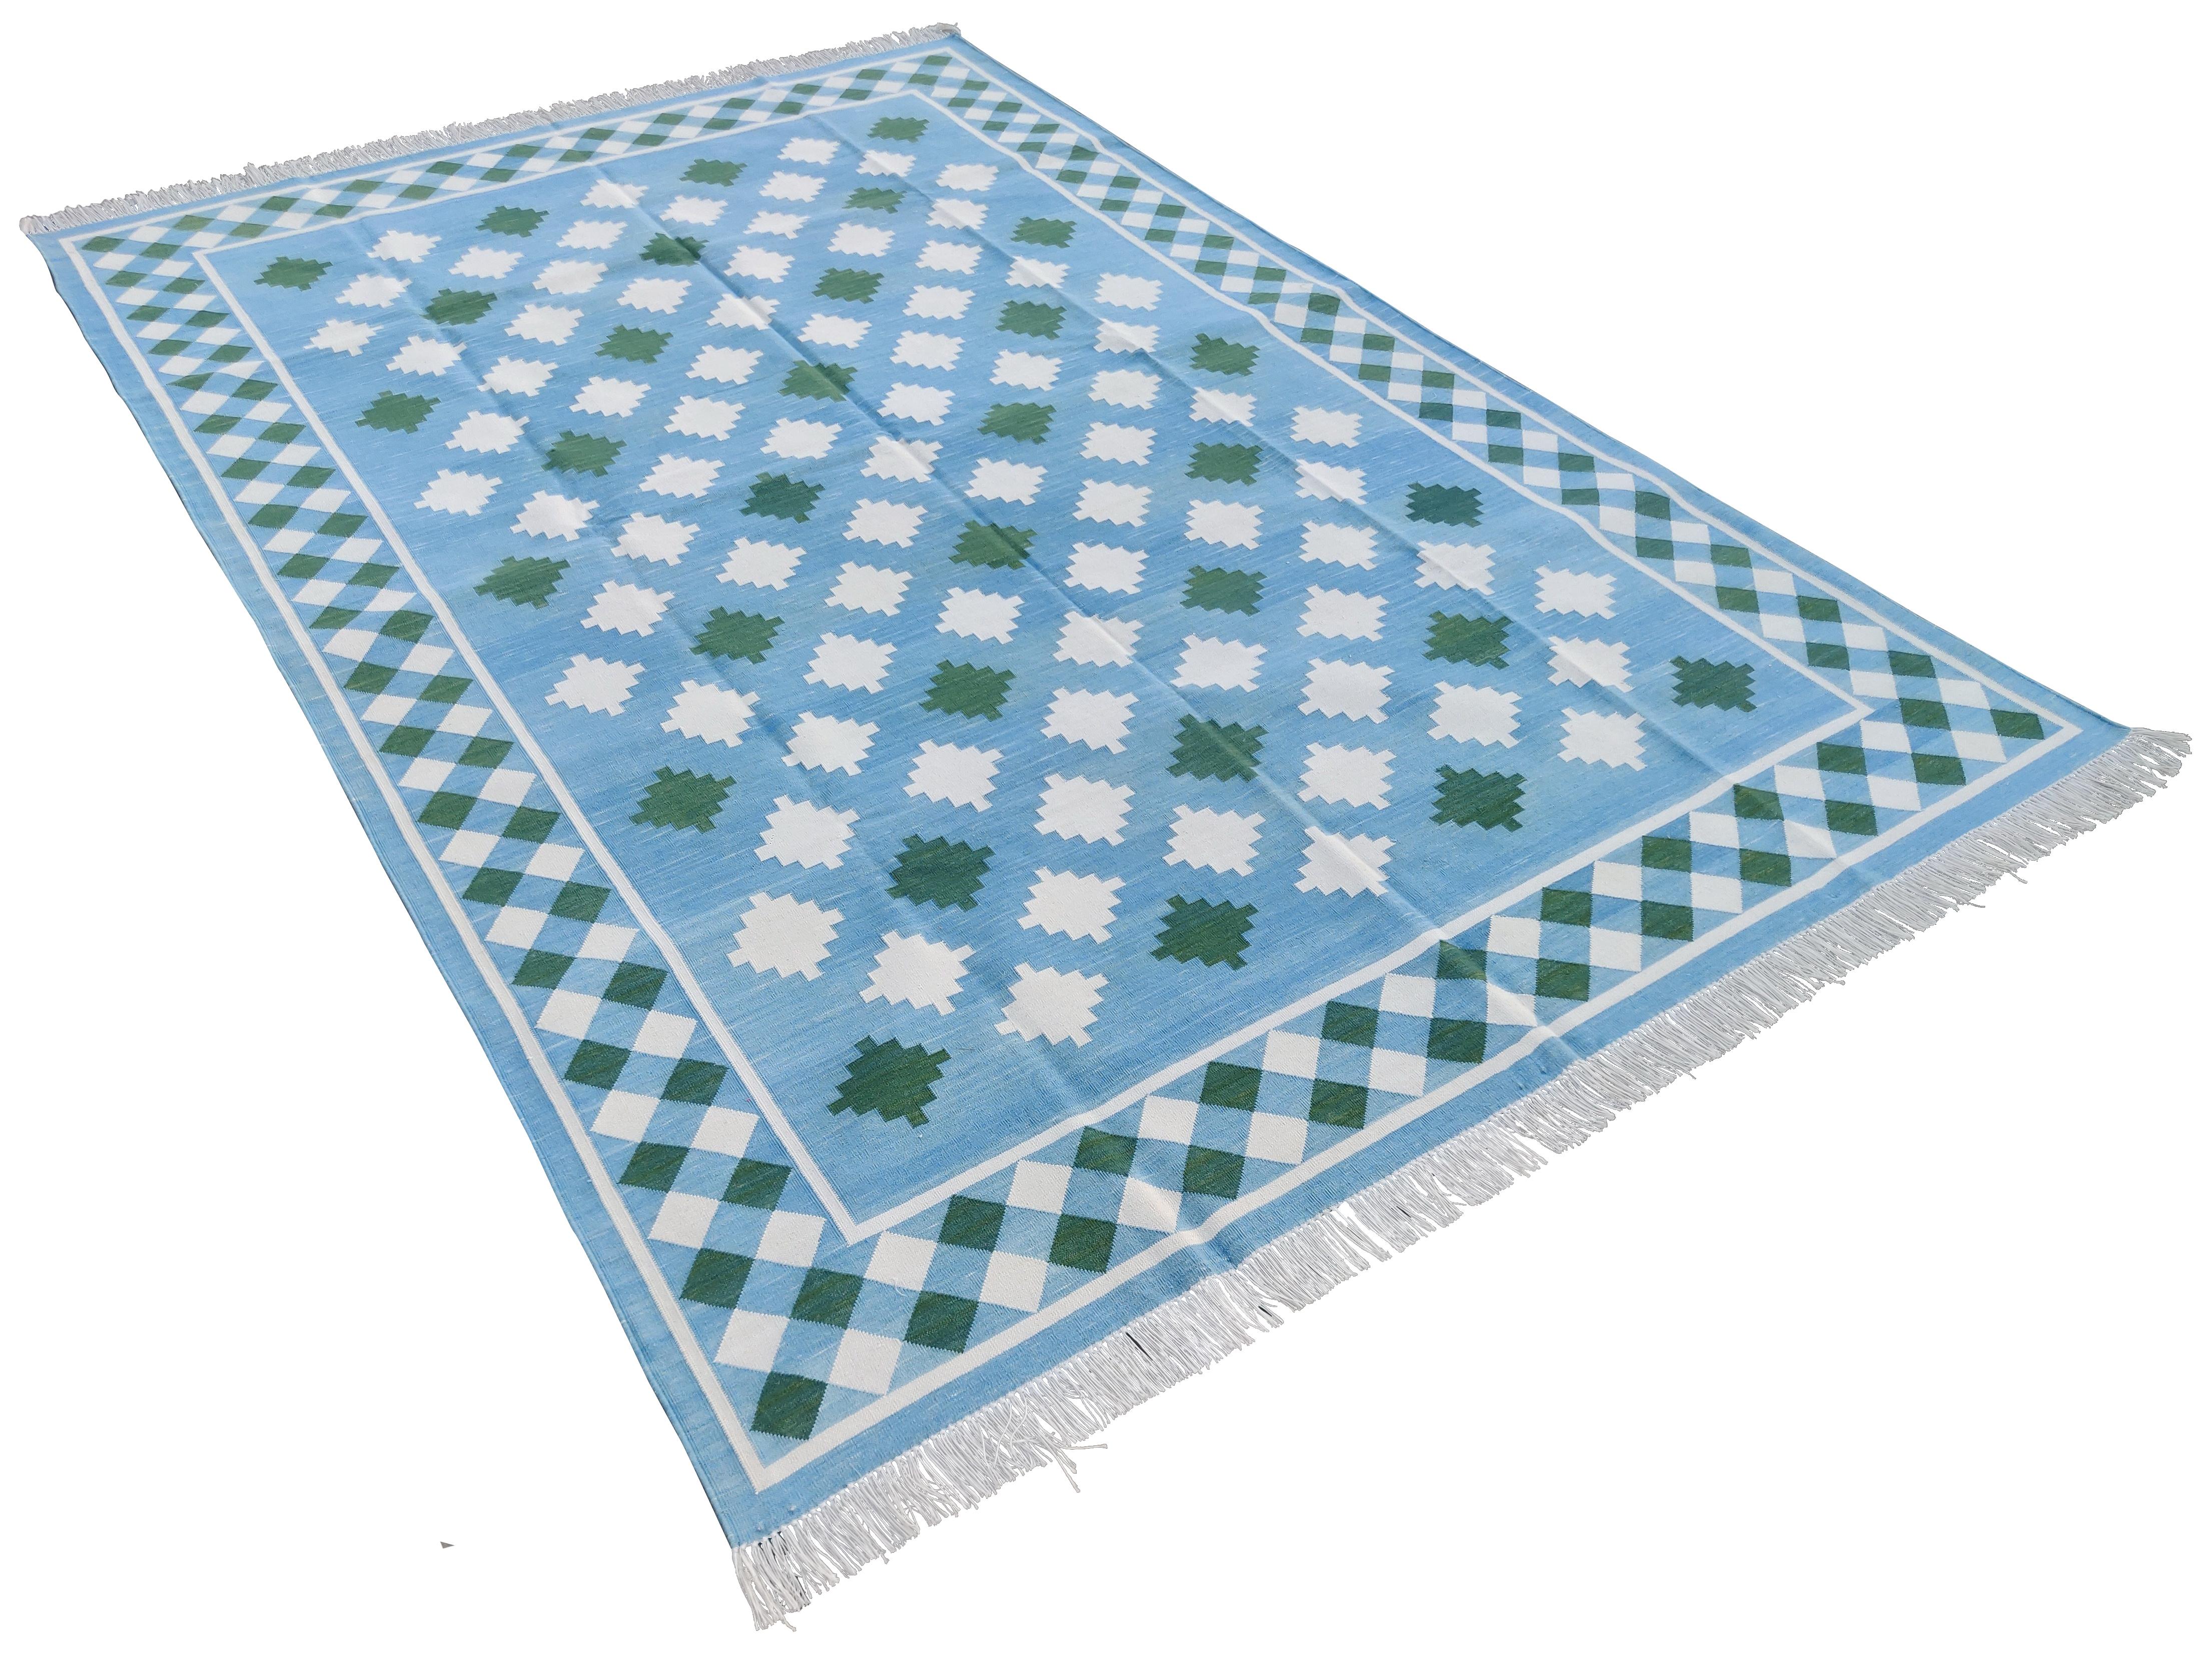 Cotton Natural Vegetable Dyed Cream, Sky Blue And Green Geometric Star Indian Rug-6'x9'
These special flat-weave dhurries are hand-woven with 15 ply 100% cotton yarn. Due to the special manufacturing techniques used to create our rugs, the size and